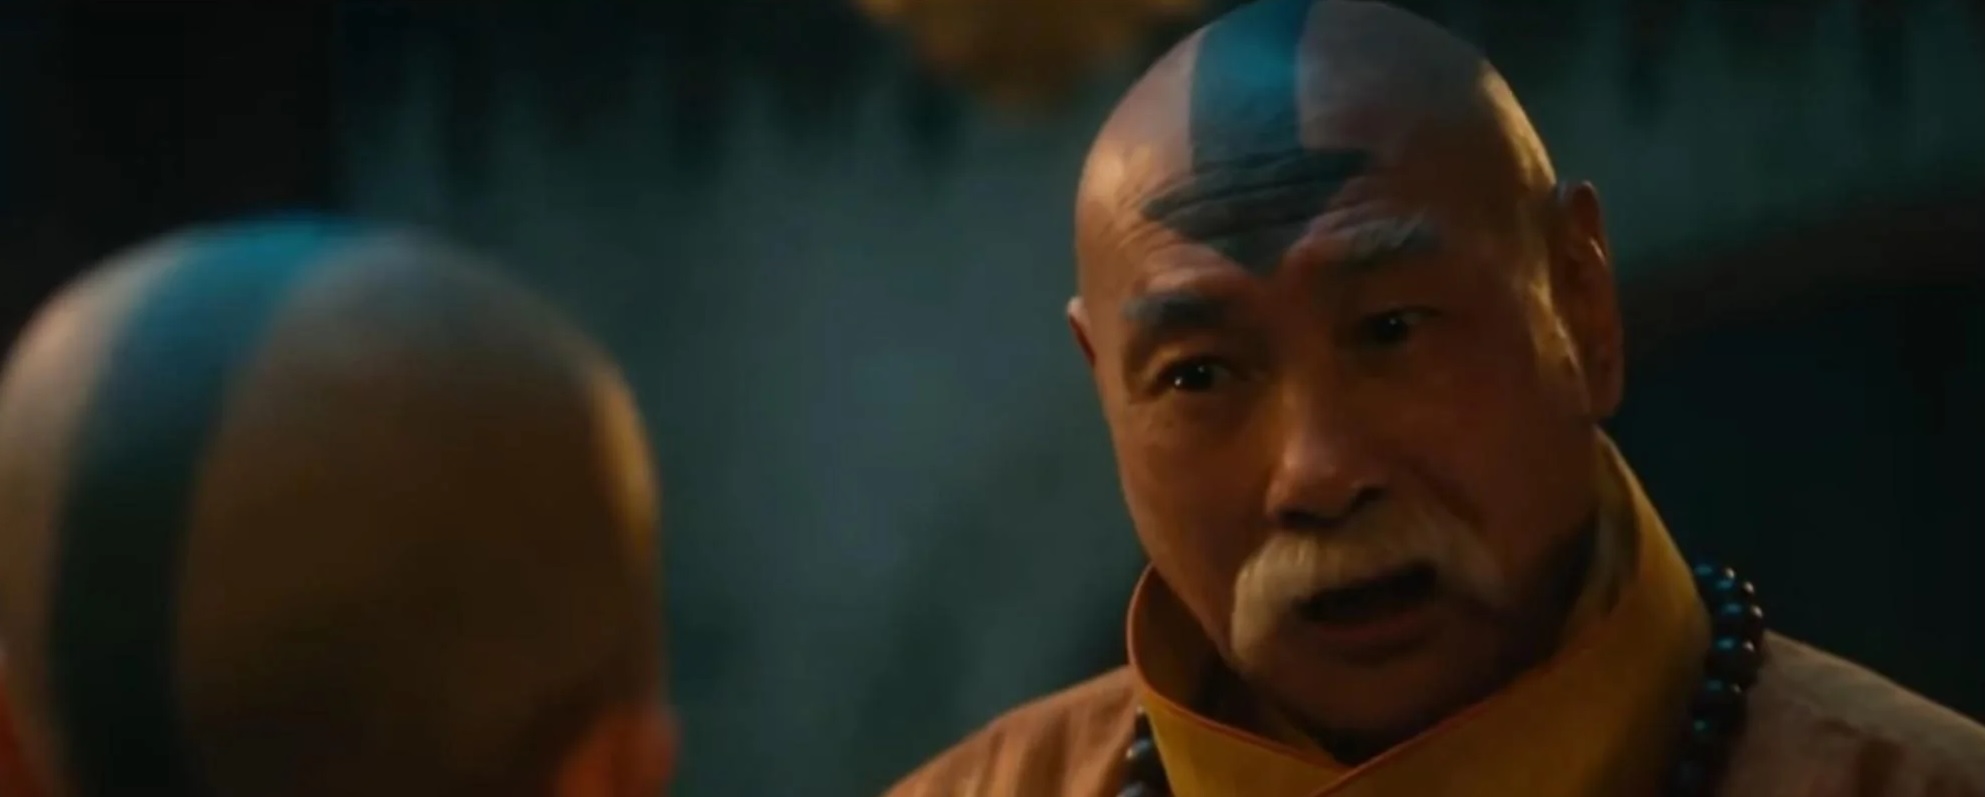 Lim Kay Siu discusses his role as Gyatso in Avatar: The Last Airbender and shares insights on Singapore's 'world-class' actors.